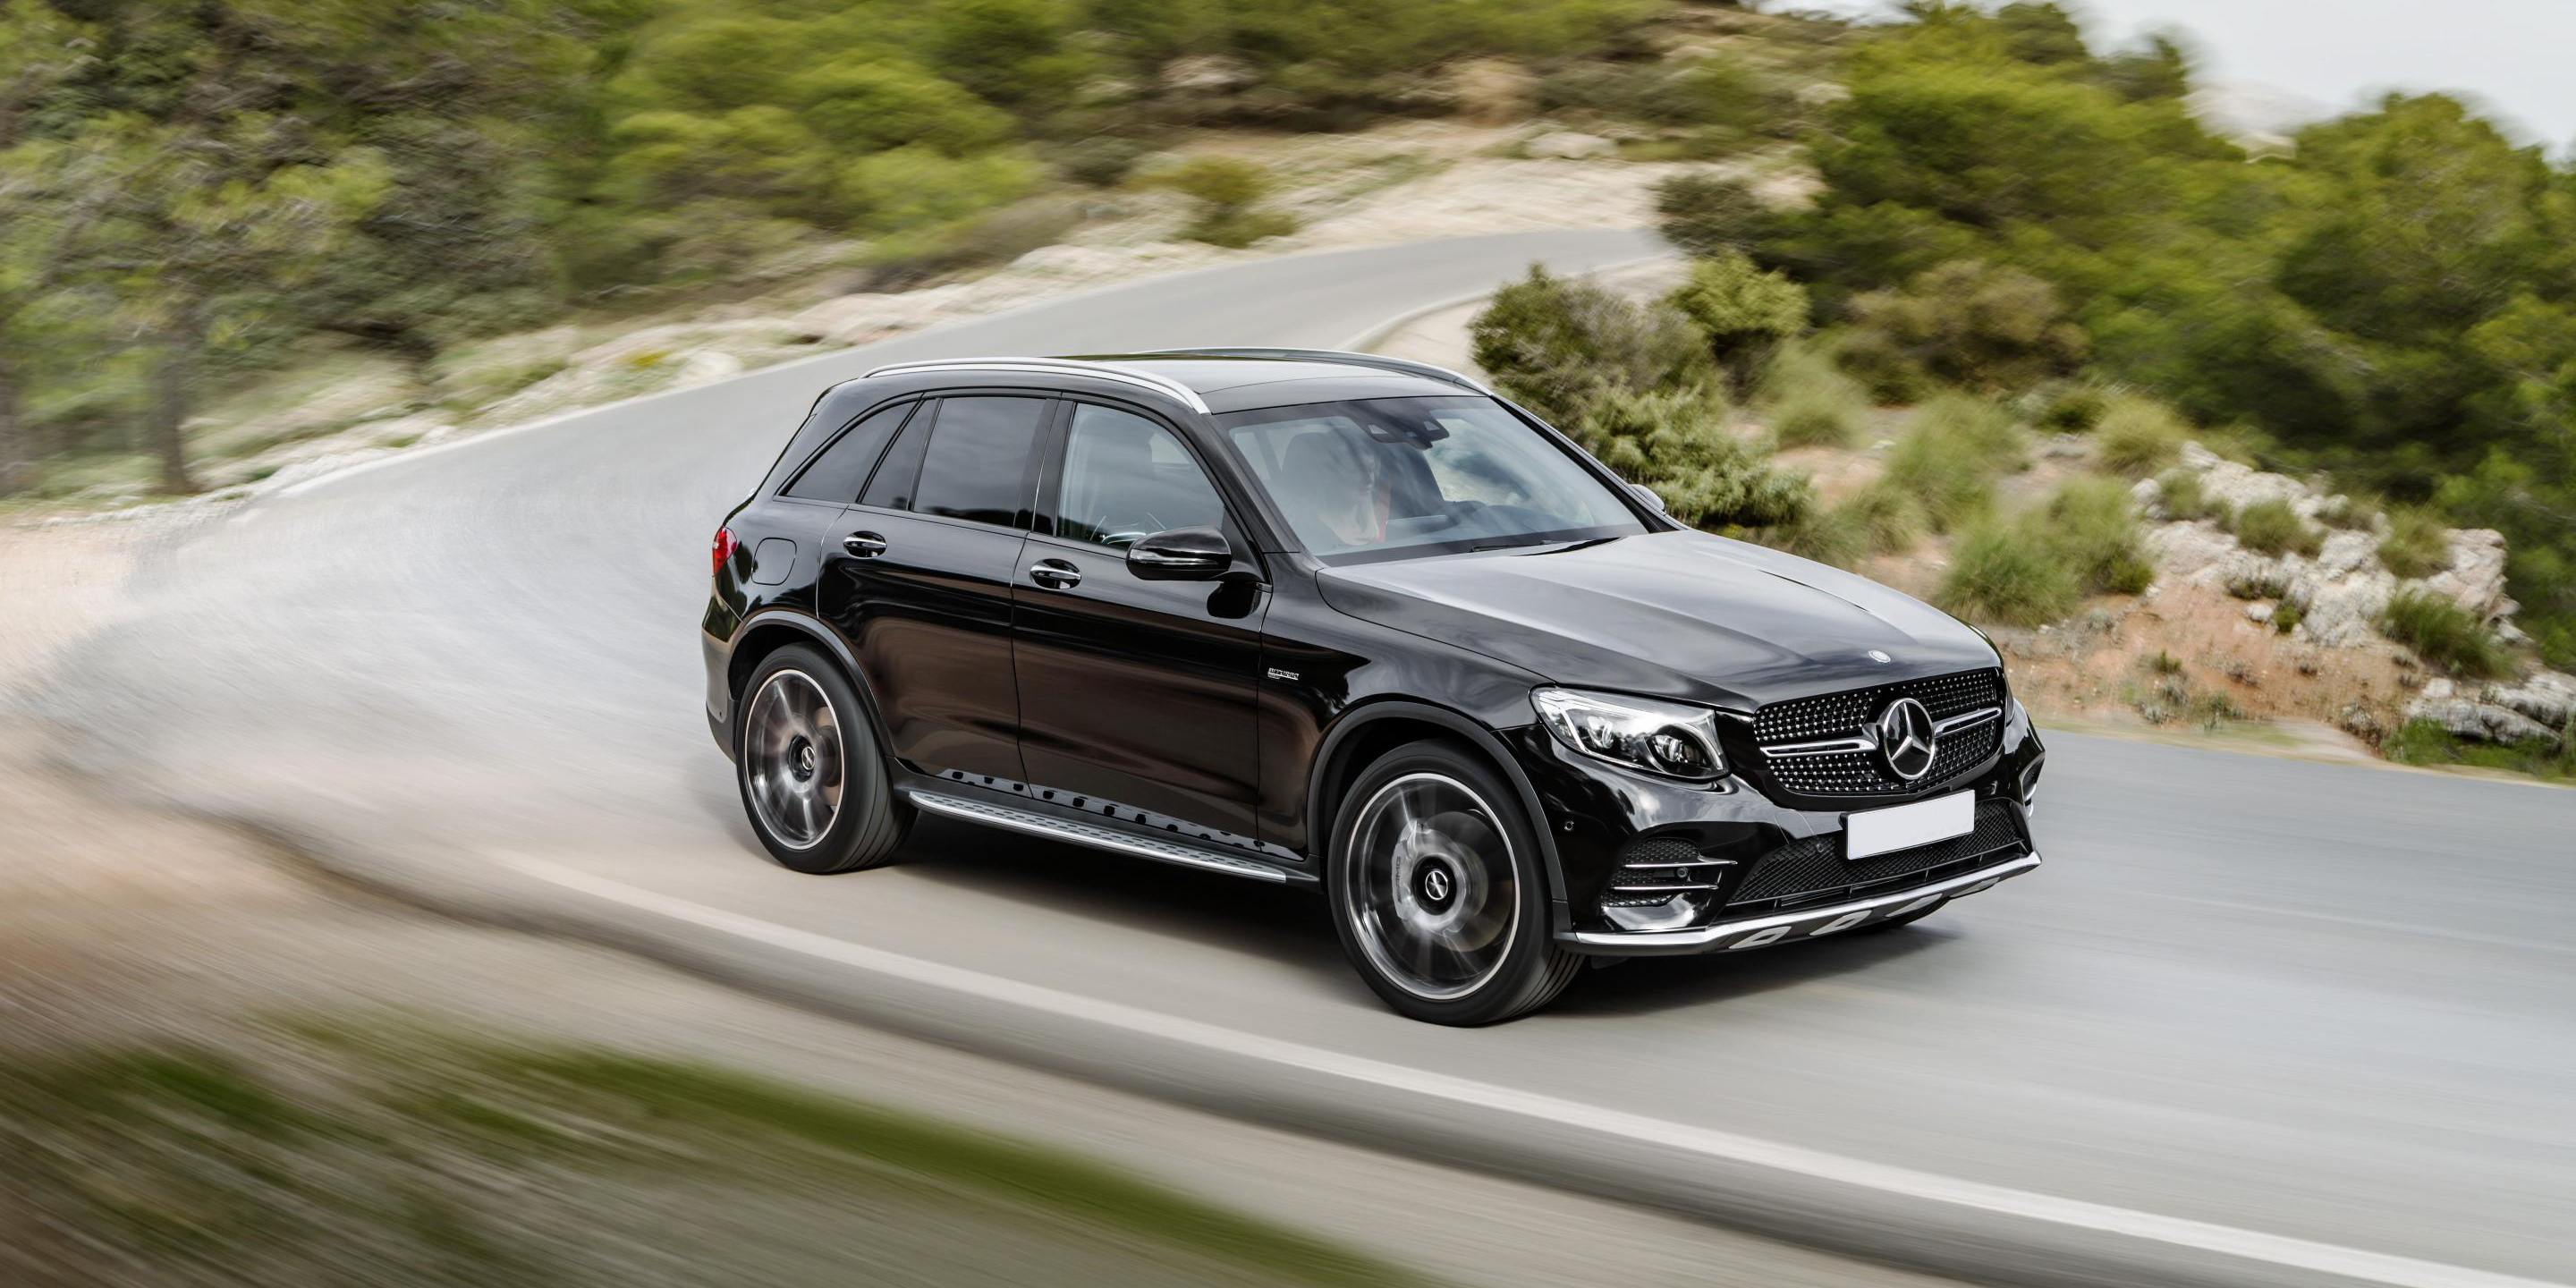 Mercedes-Benz GLC (2015 - 2018) used car review, Car review